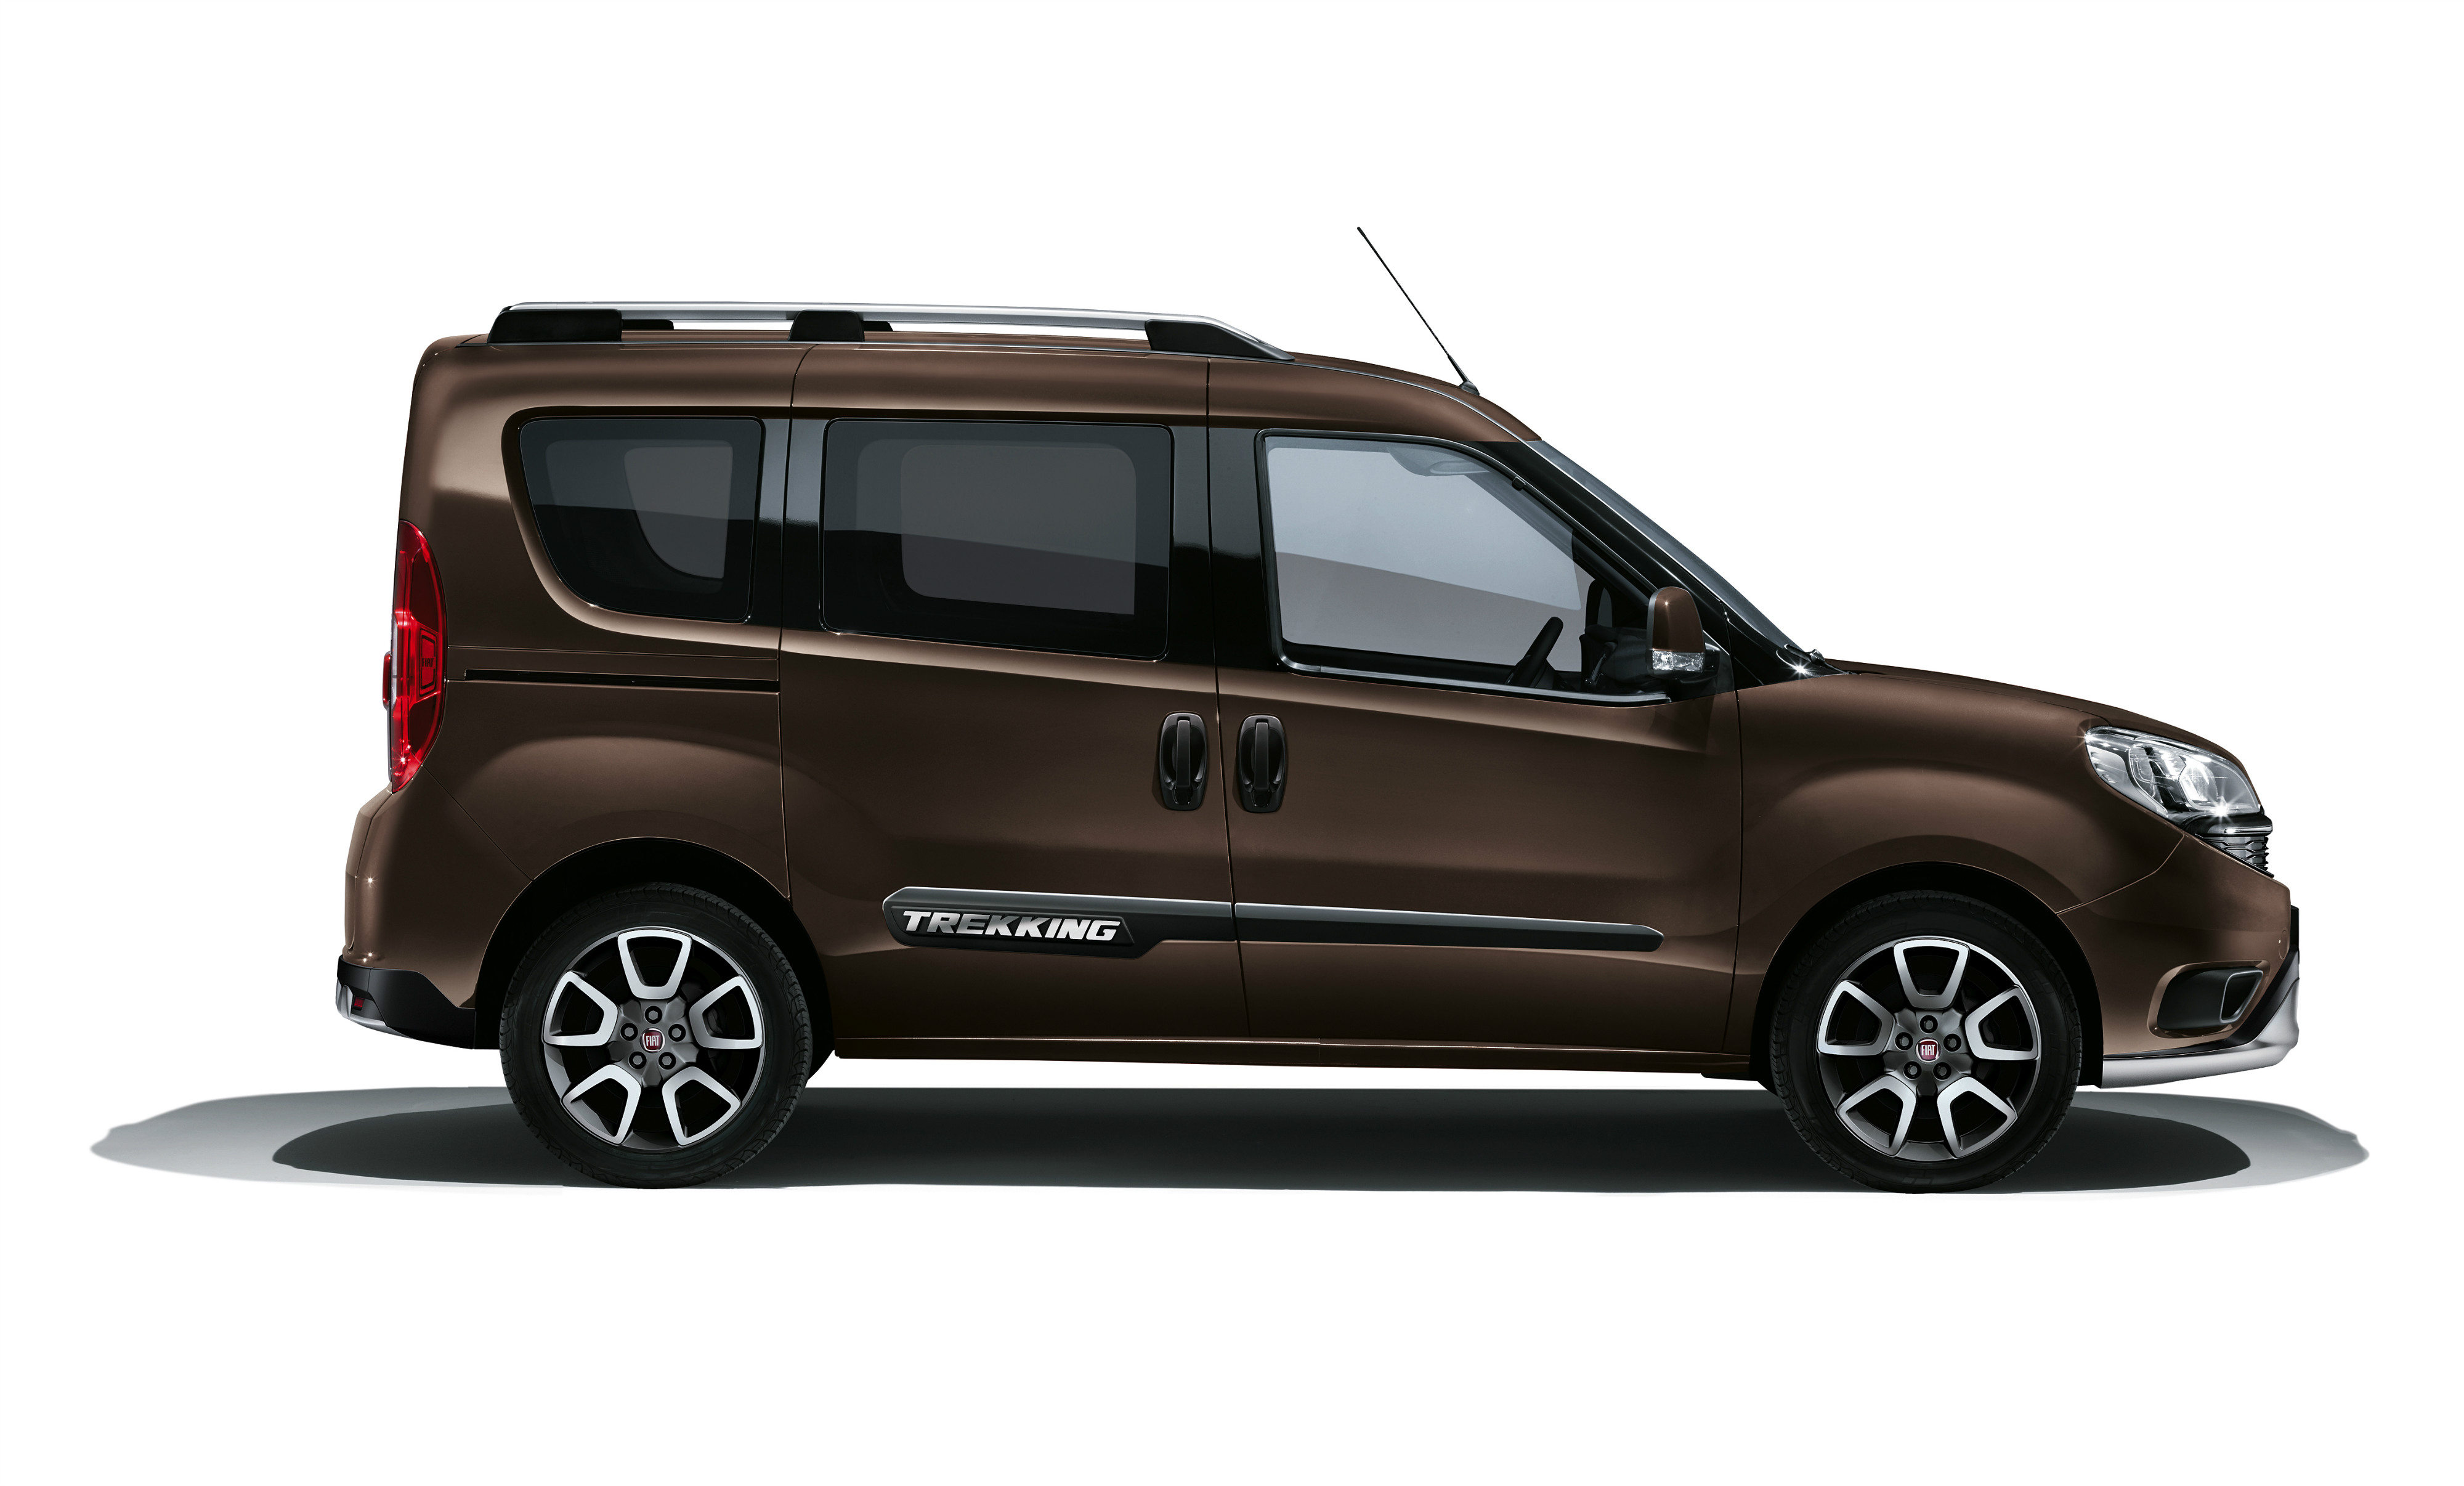 Fiat DOblo has a whopping 790-litre boot